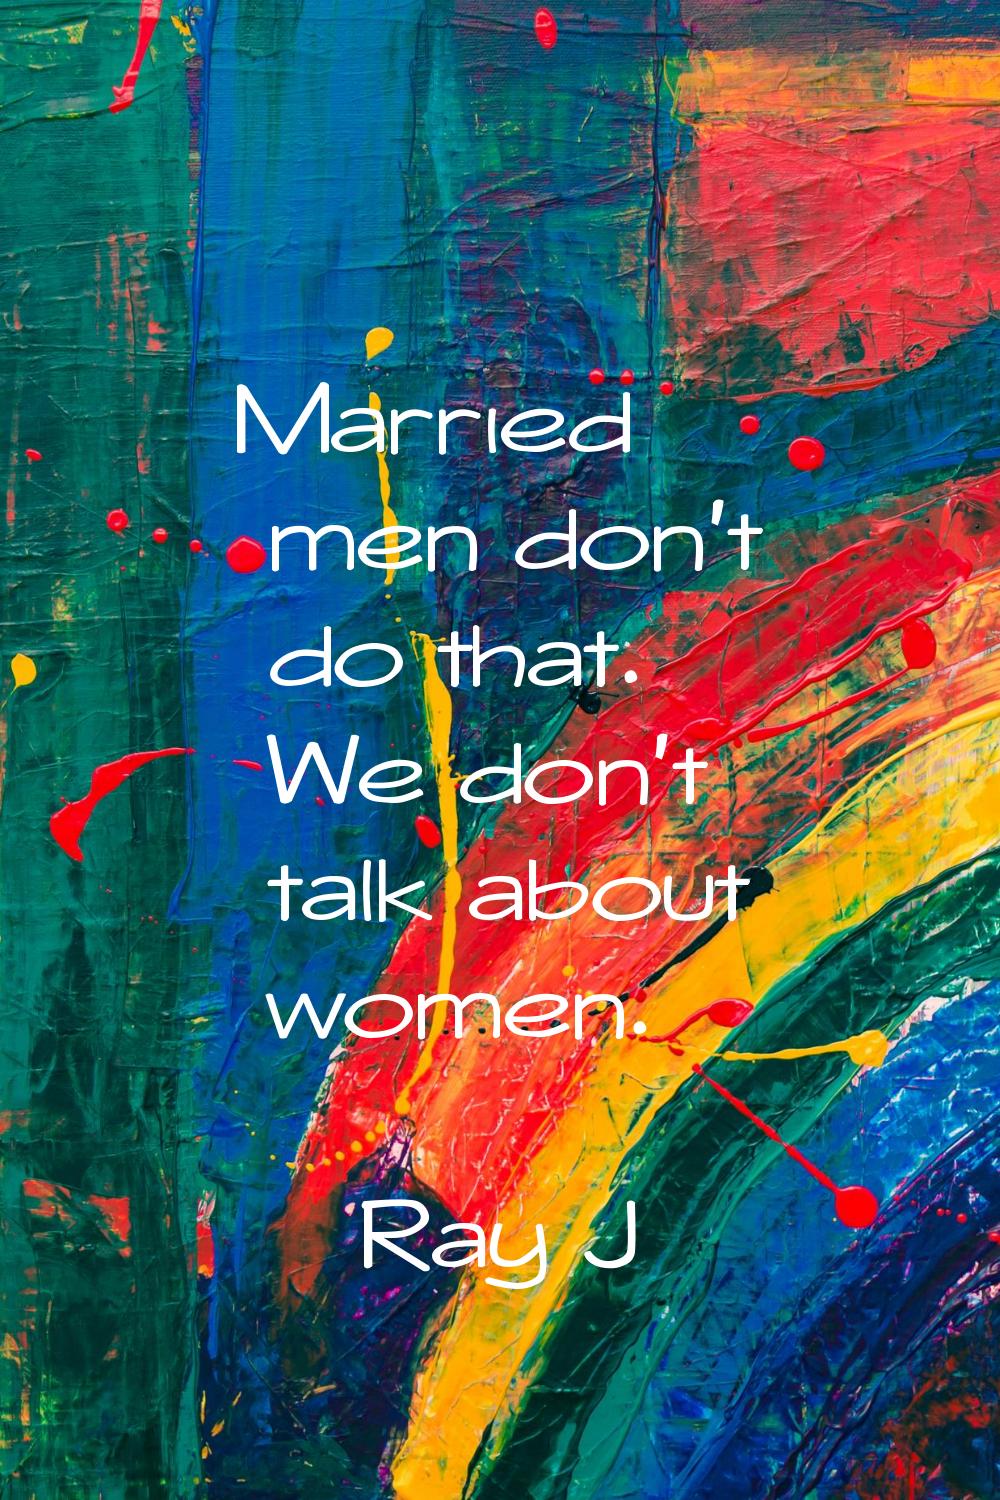 Married men don't do that. We don't talk about women.